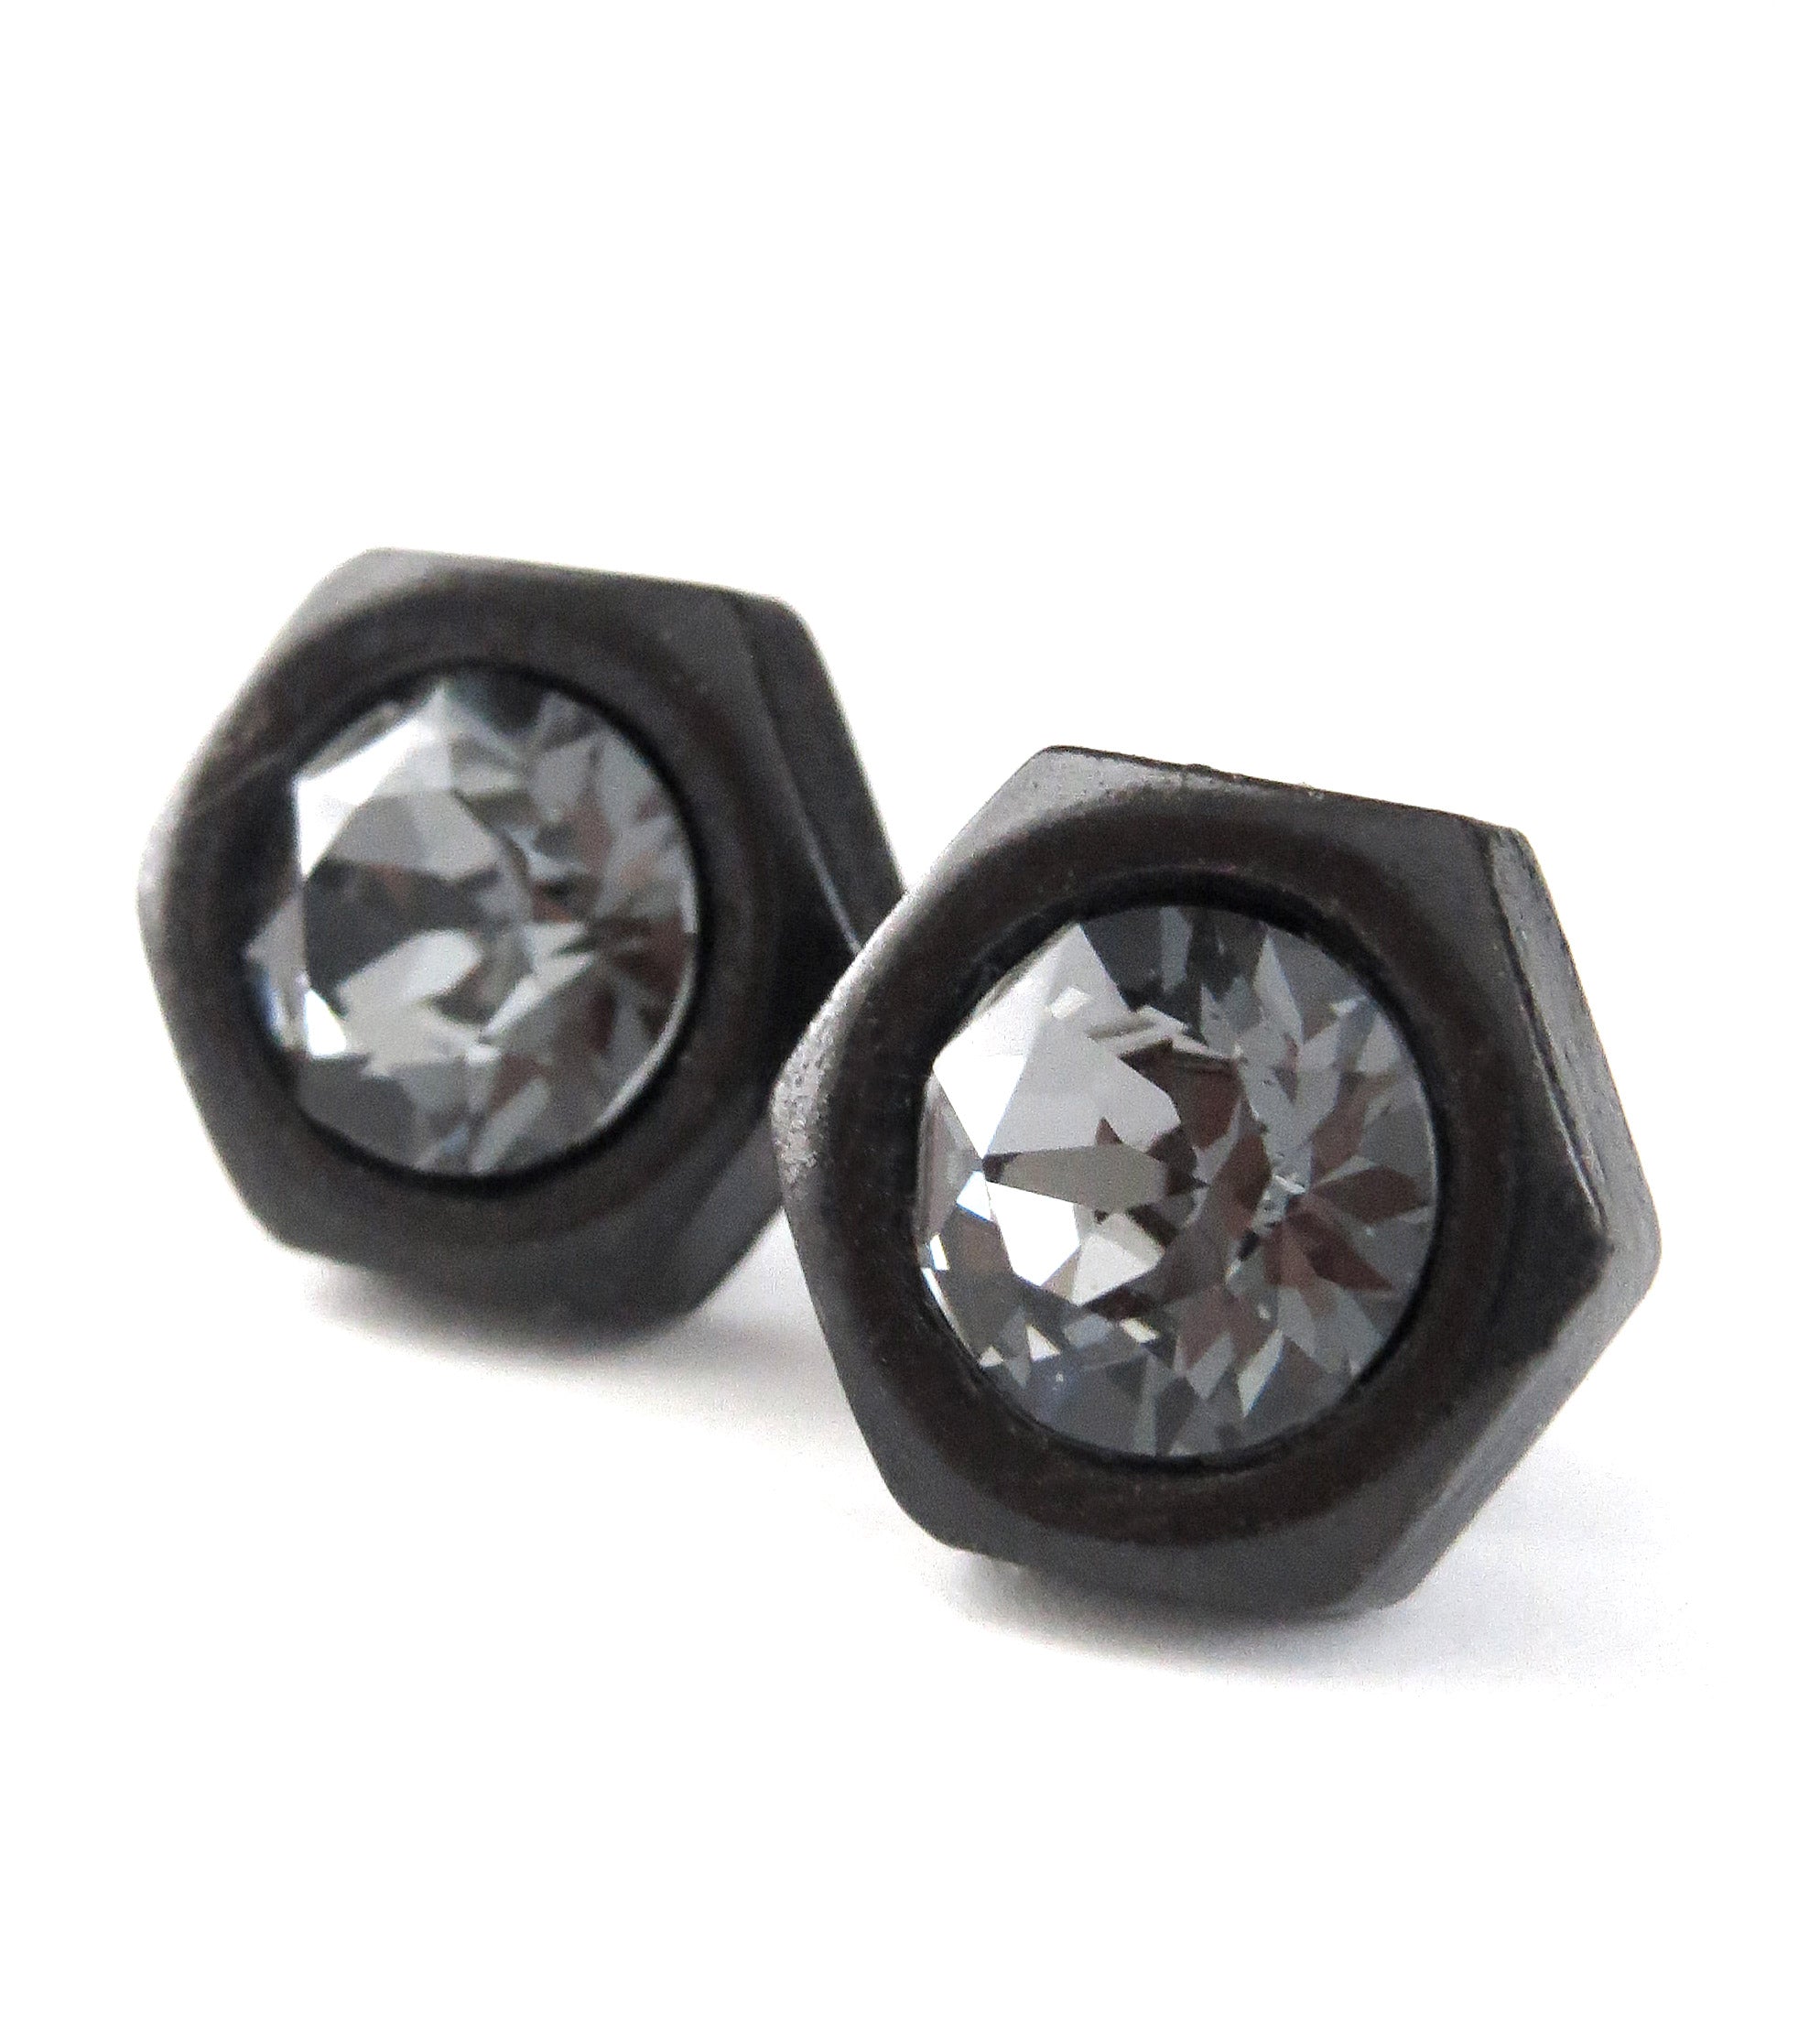 Mens Hex Nut Stud Earrings with Black Crystal, Hardware Jewelry ...